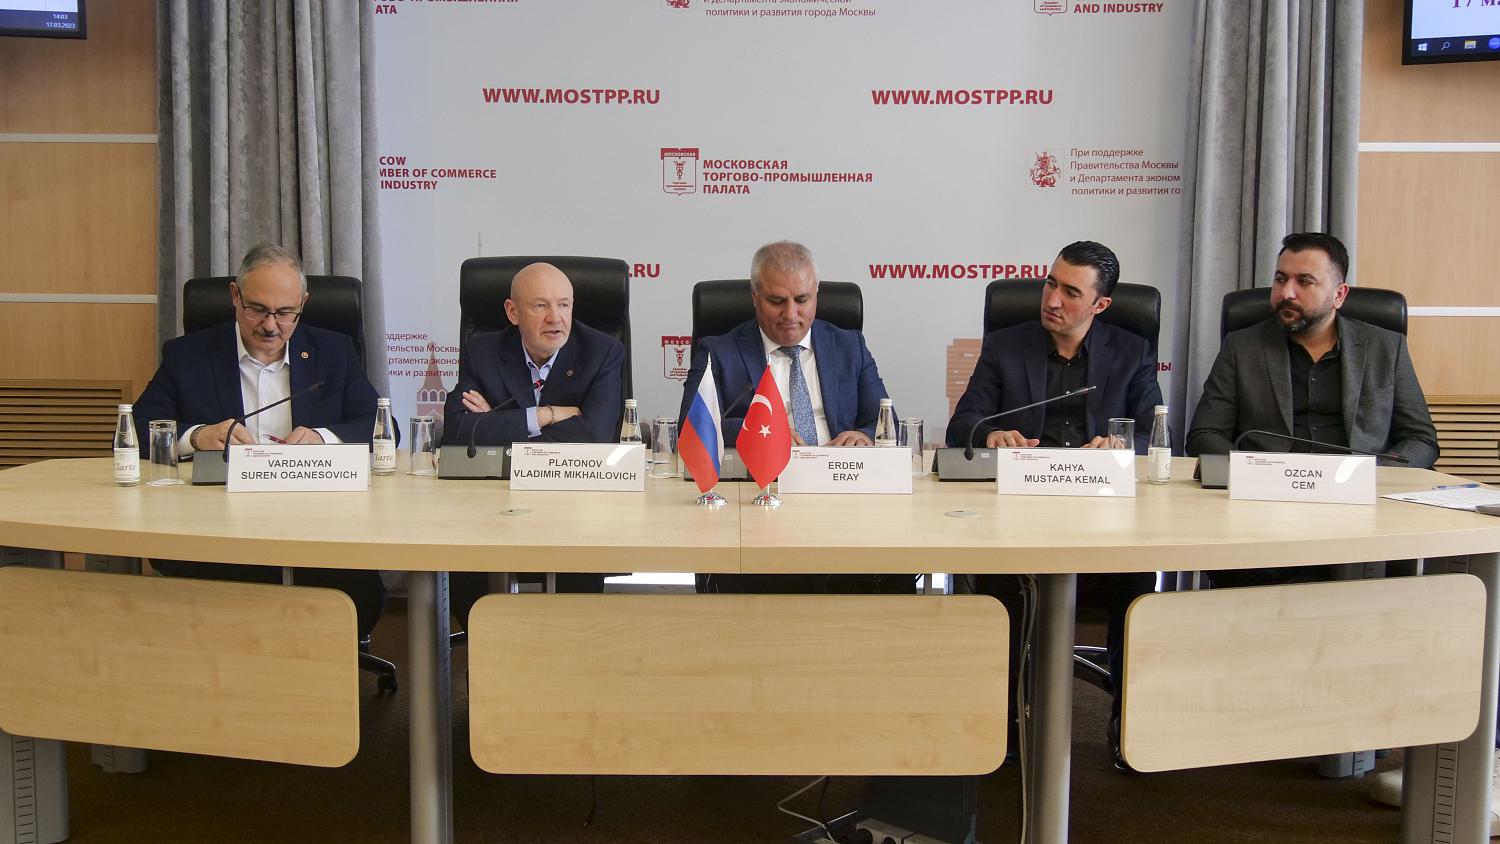 A meeting of entrepreneurs of the capital and the city of Alanya (Turkey) was held on the site of the MCCI